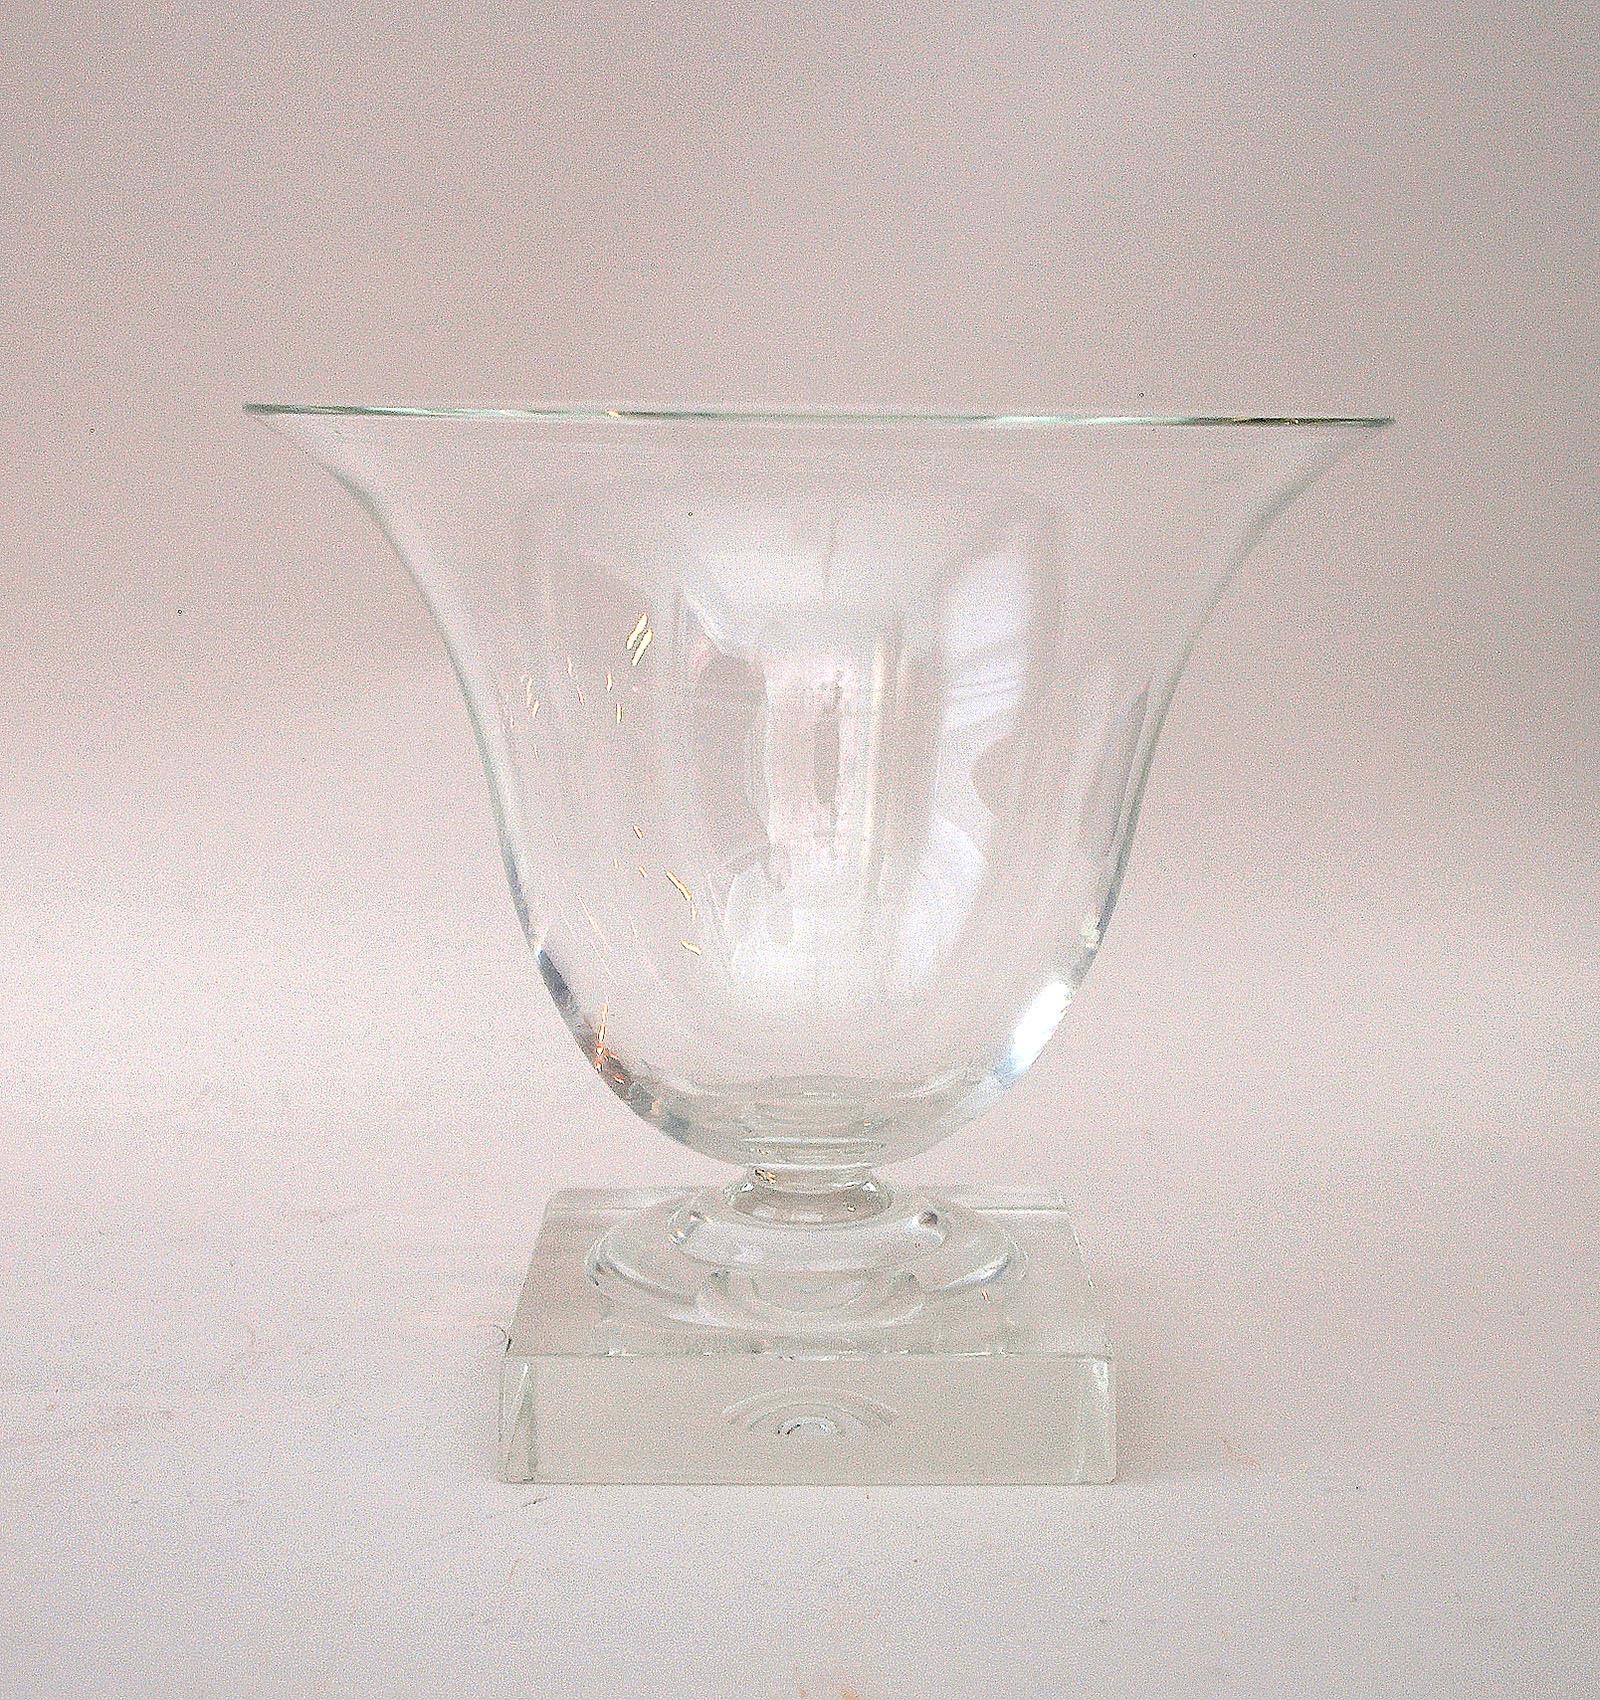 The simple but exquisite form of this urn, or vase, was derived from the ancient Greek mixing bowl, or krater. When Steuben Glass was revived and rebranded in the early 1930s, the urn was an early smash hit. Produced in different sizes, this one is